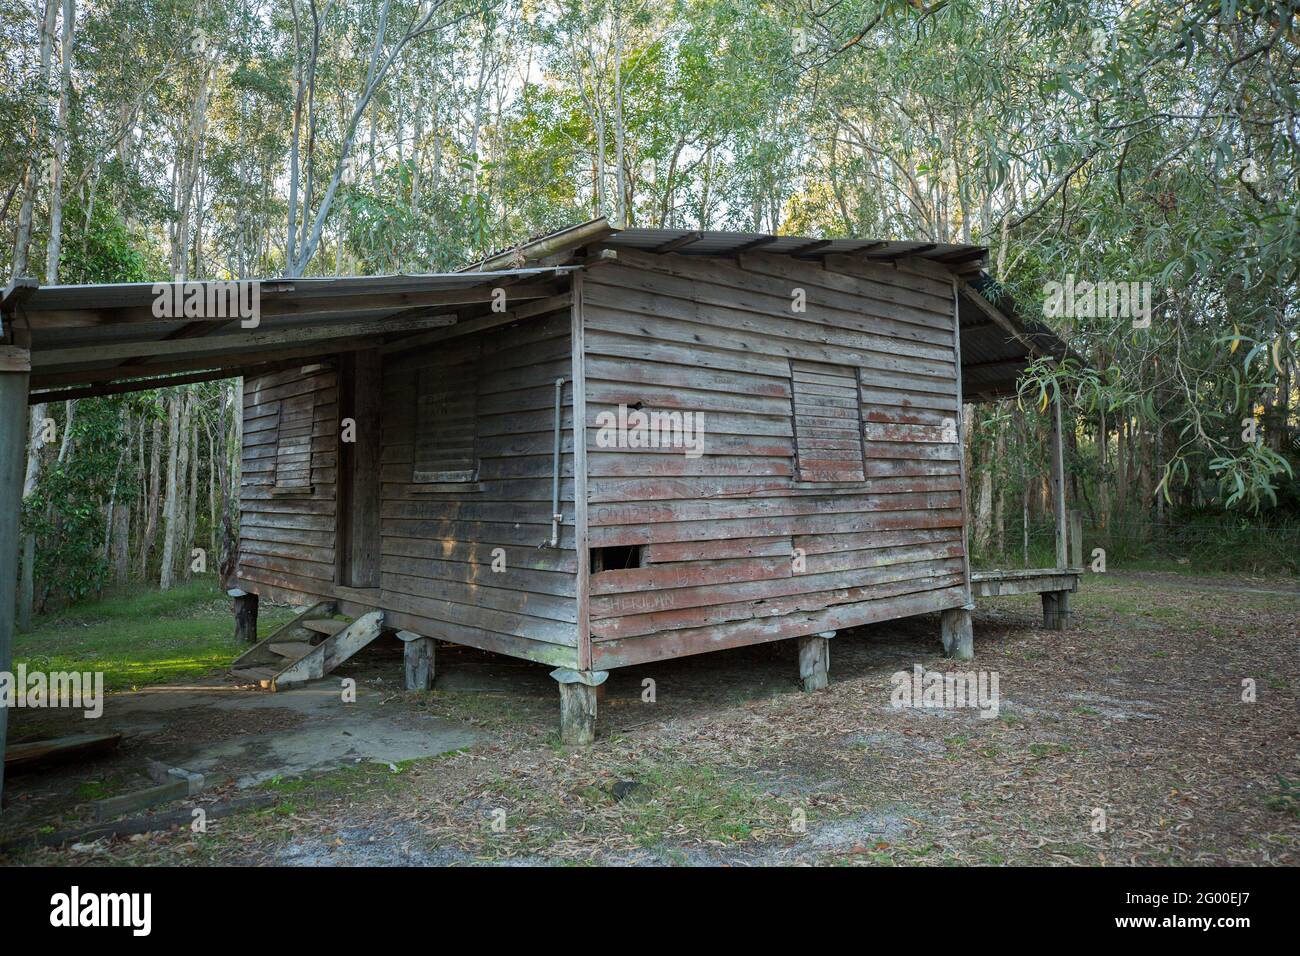 Harry's Hut, historic timber cutters' accommodation in forests of the Sunshine Coast, Queensland Australia Stock Photo